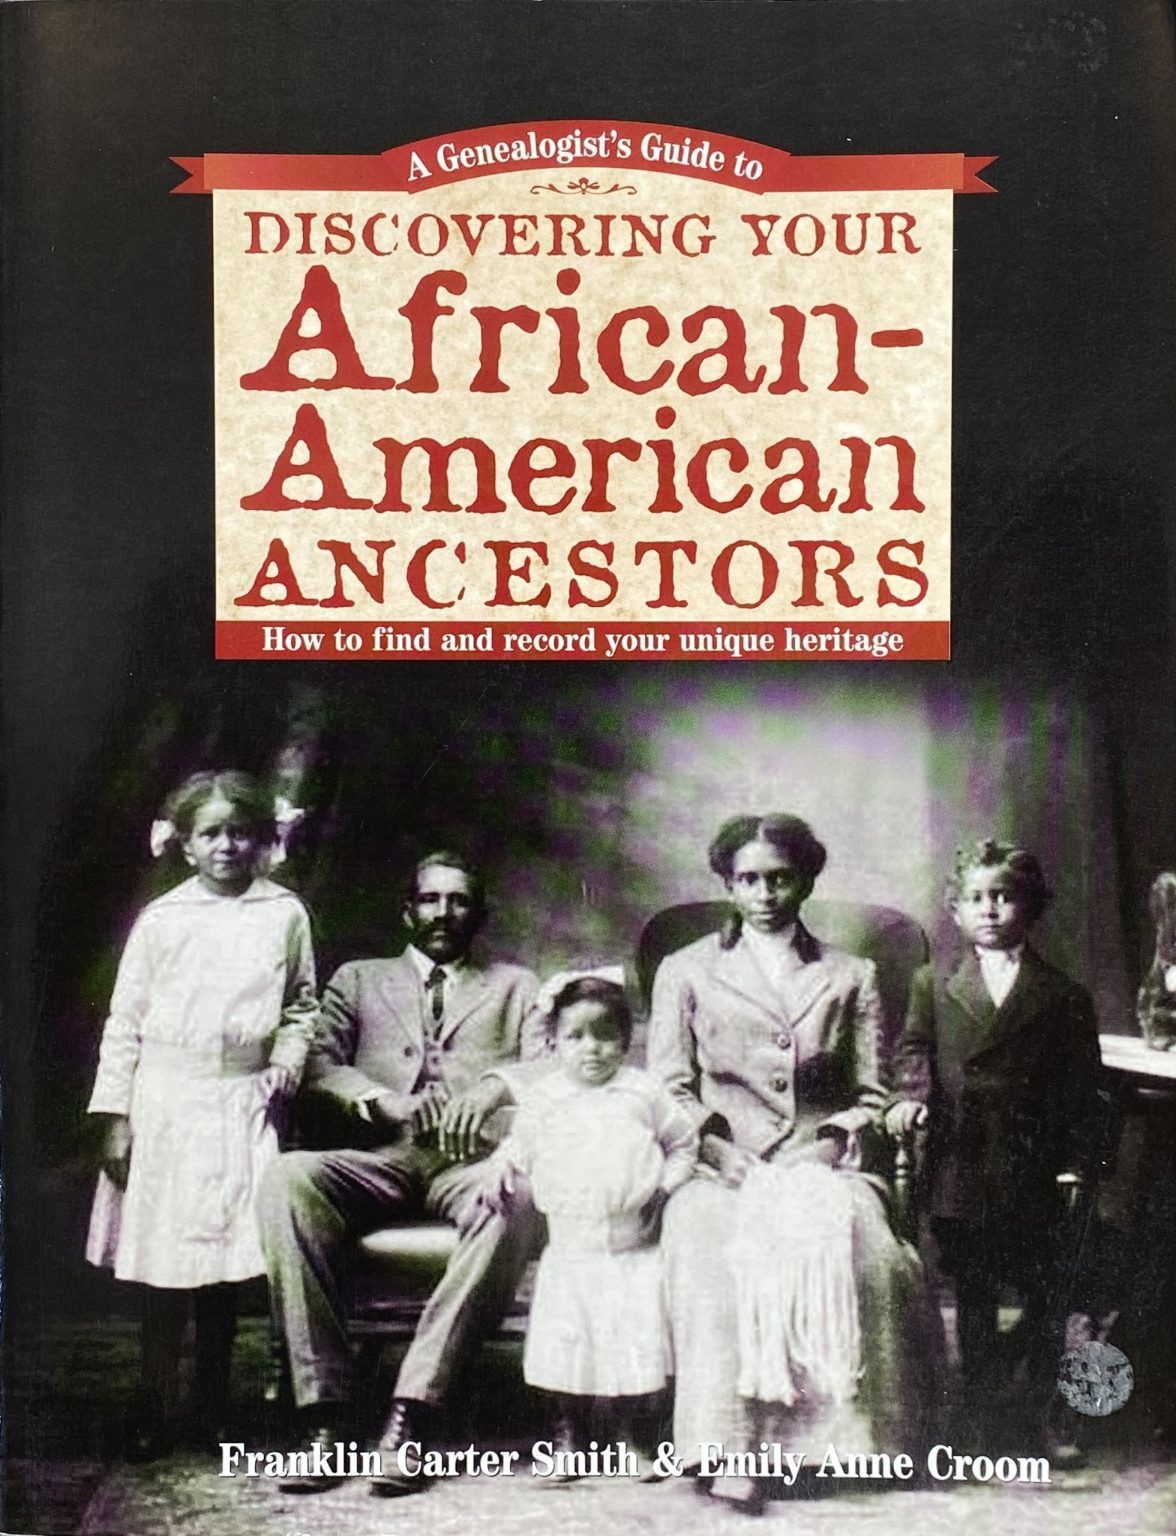 DISCOVERING YOUR AFRICAN-AMERICAN ANCESTORS